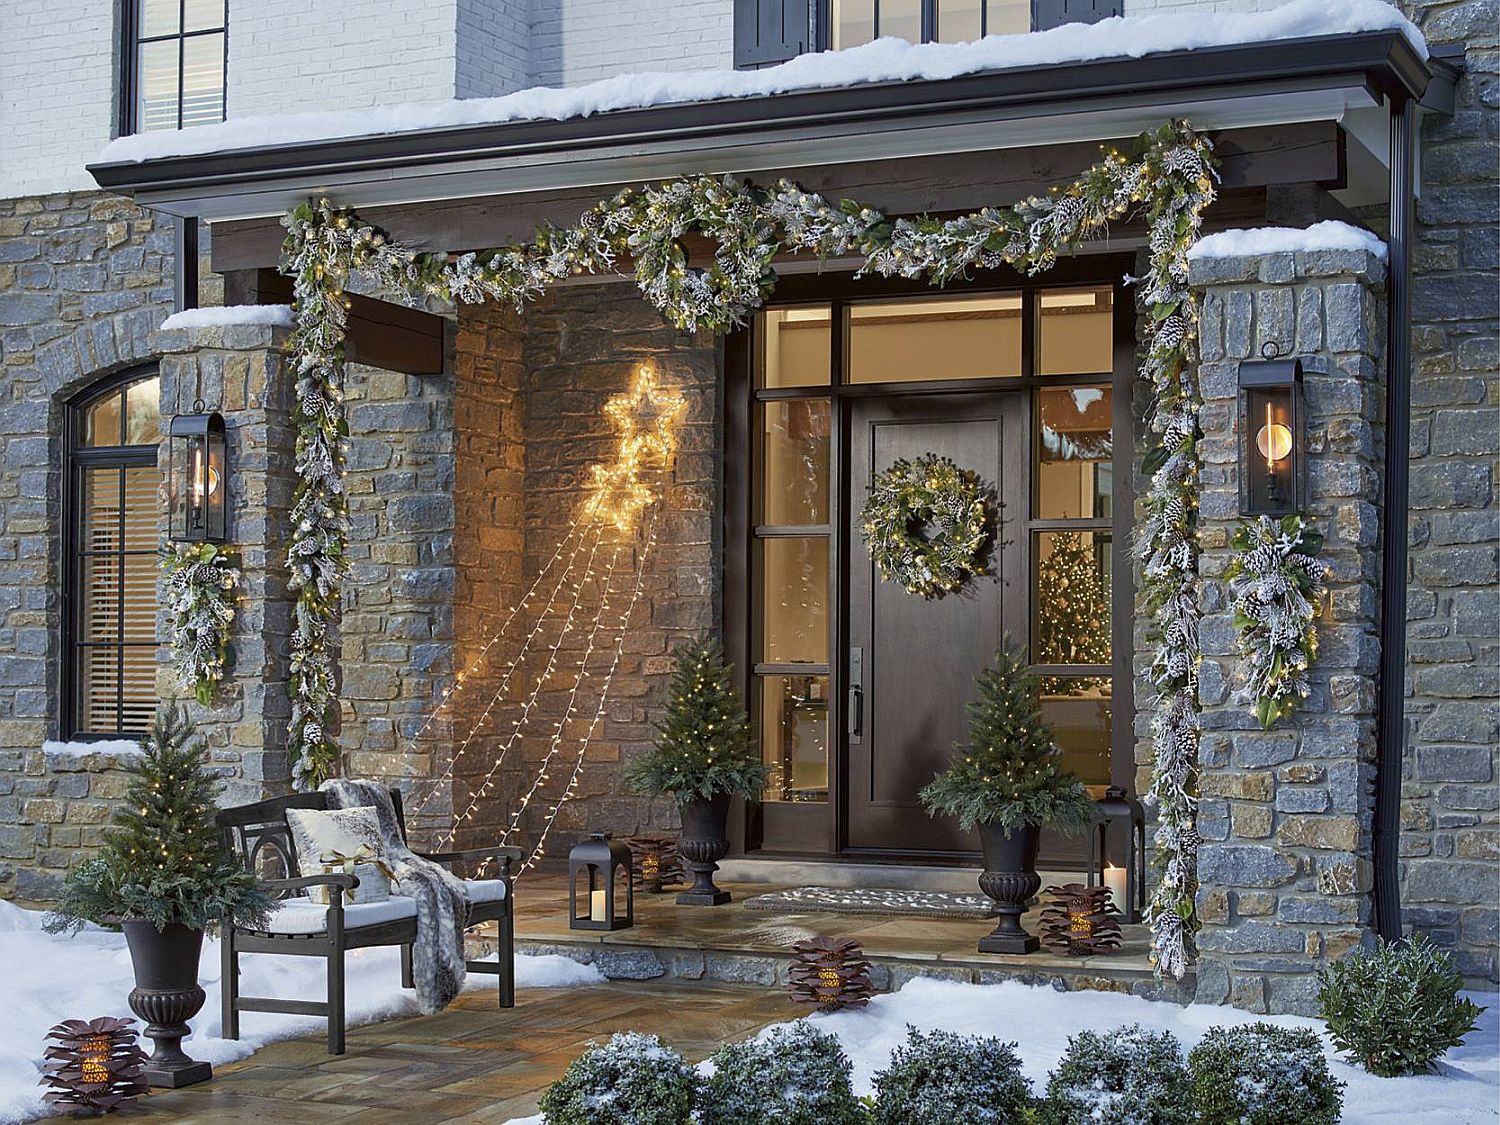 Go beyond an overload of red to deck the porch with festive charm this Holiday Season